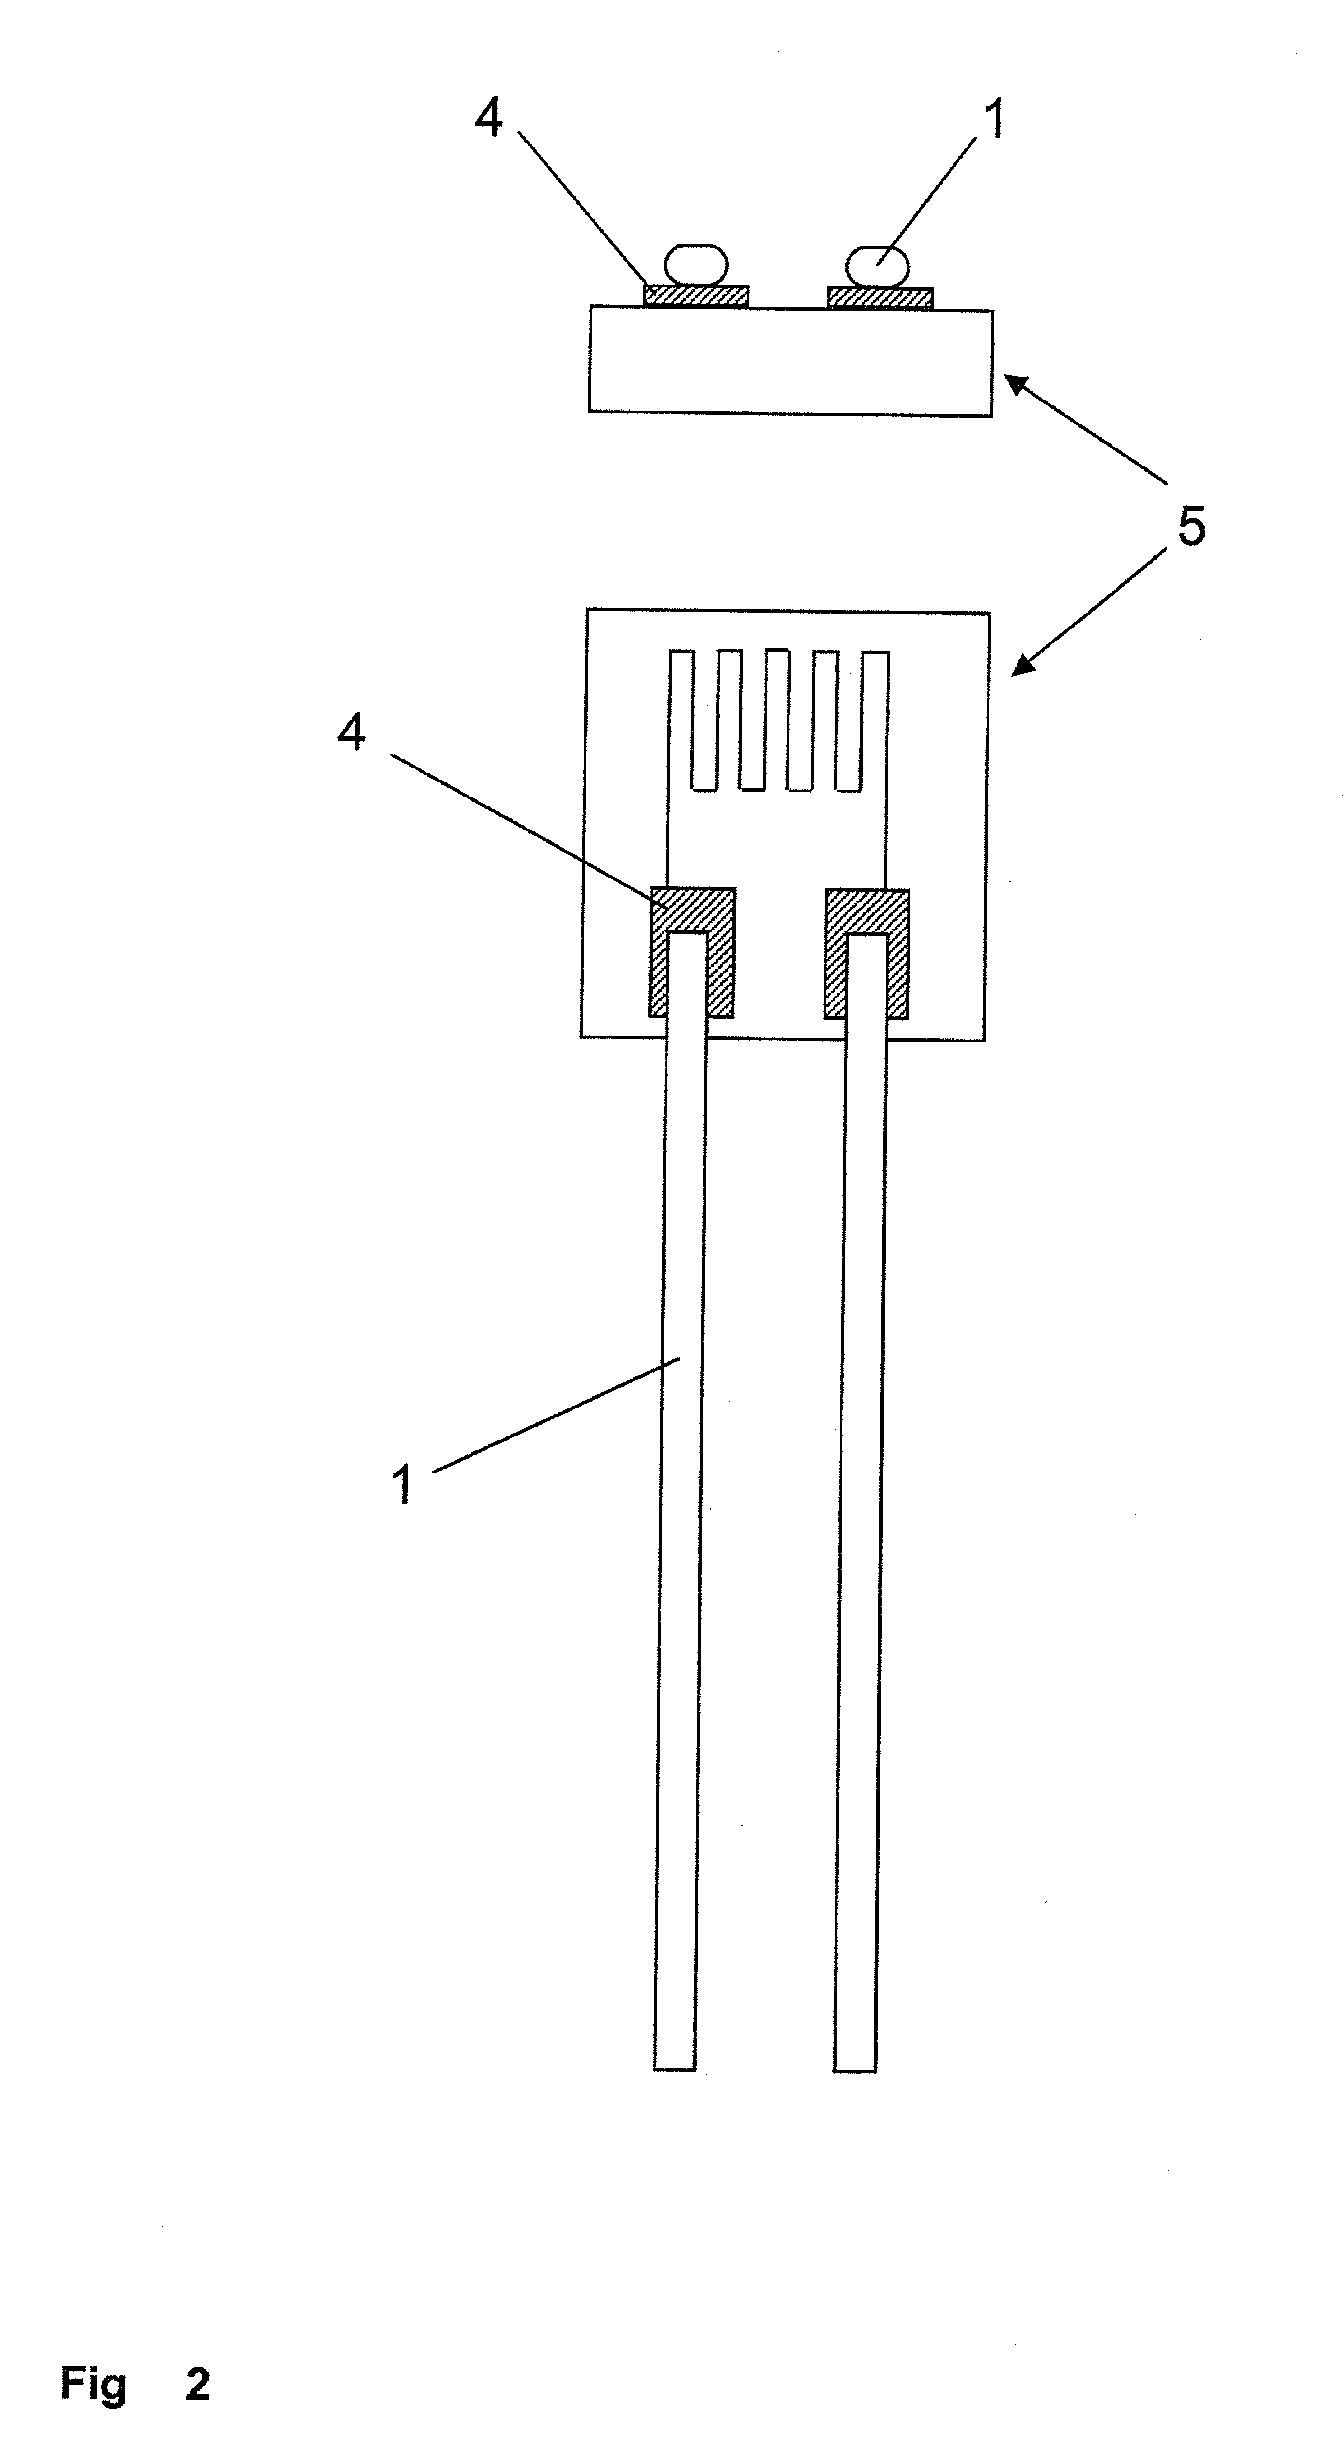 Coated wire and film resistor